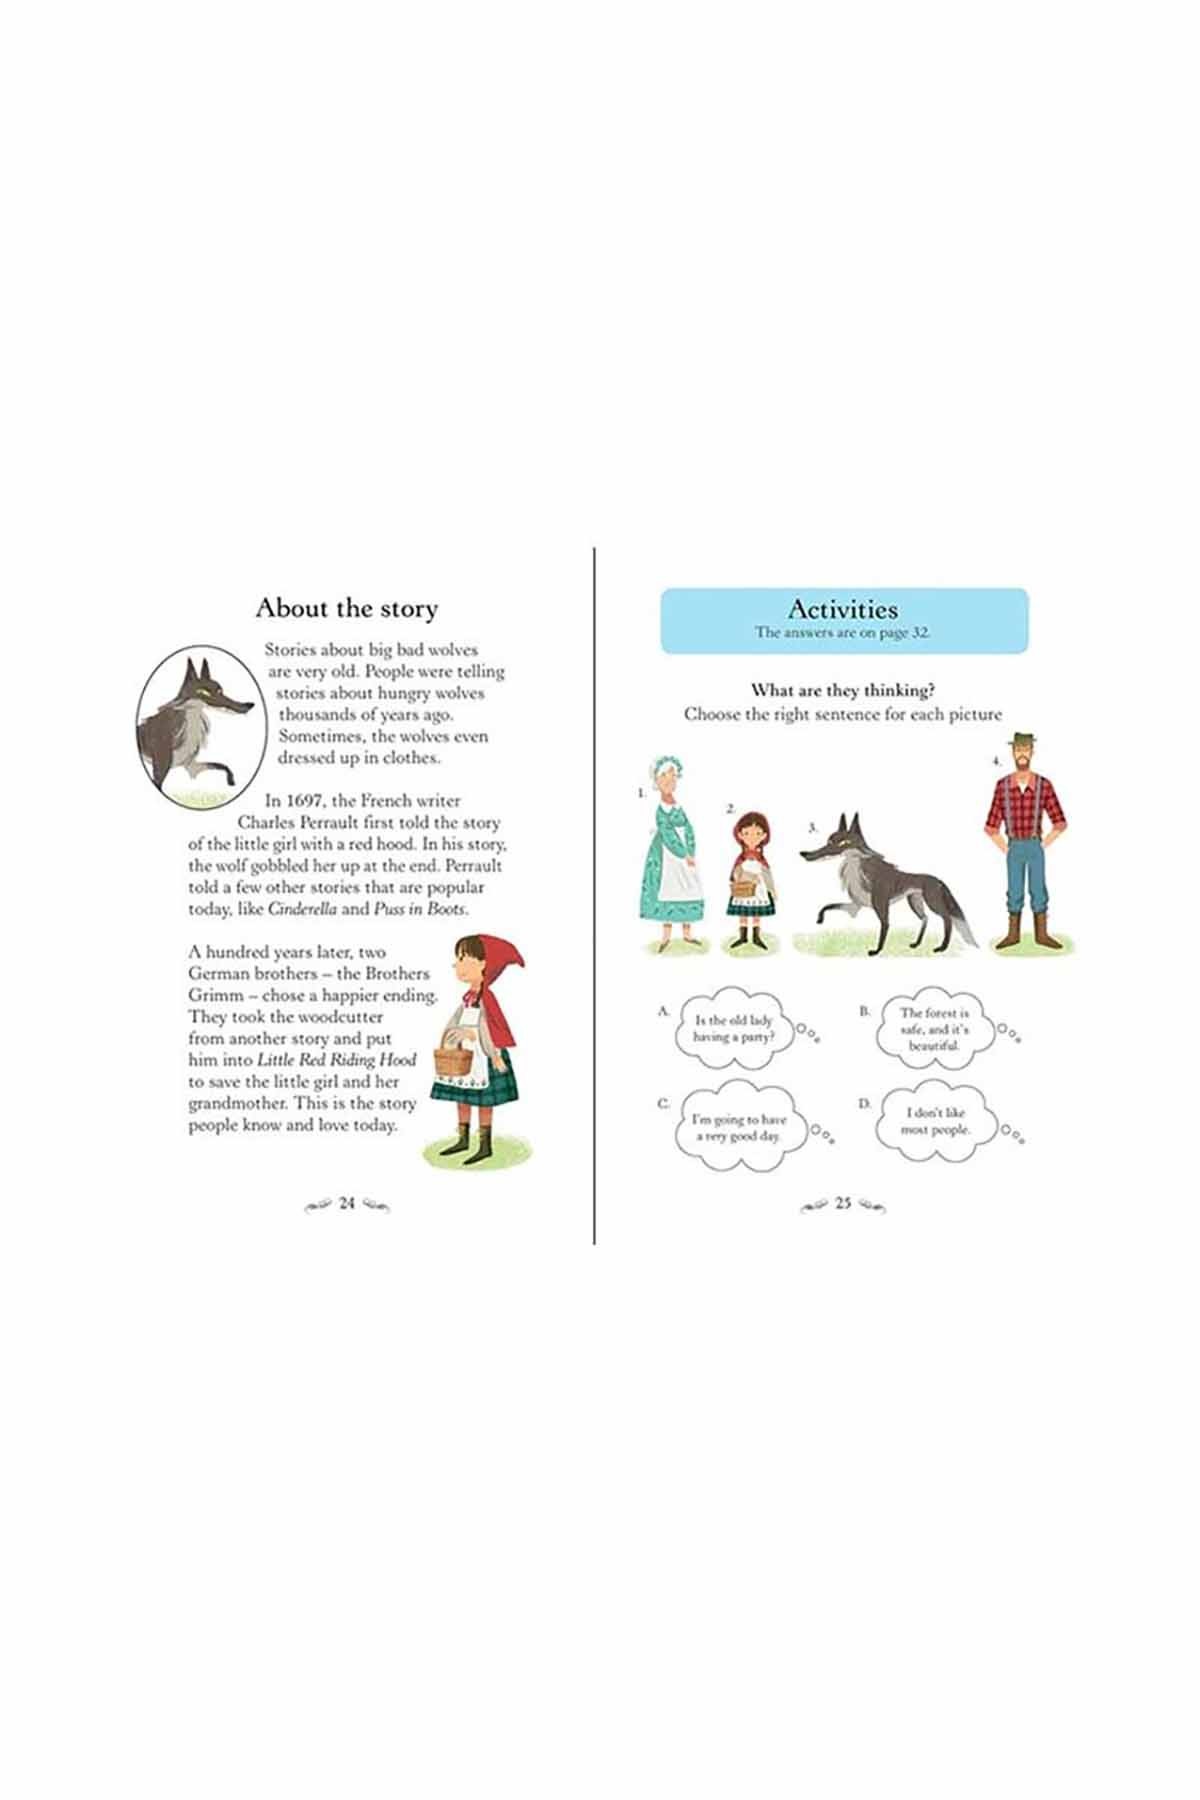 The Usborne Little Red Riding Hood Level 1